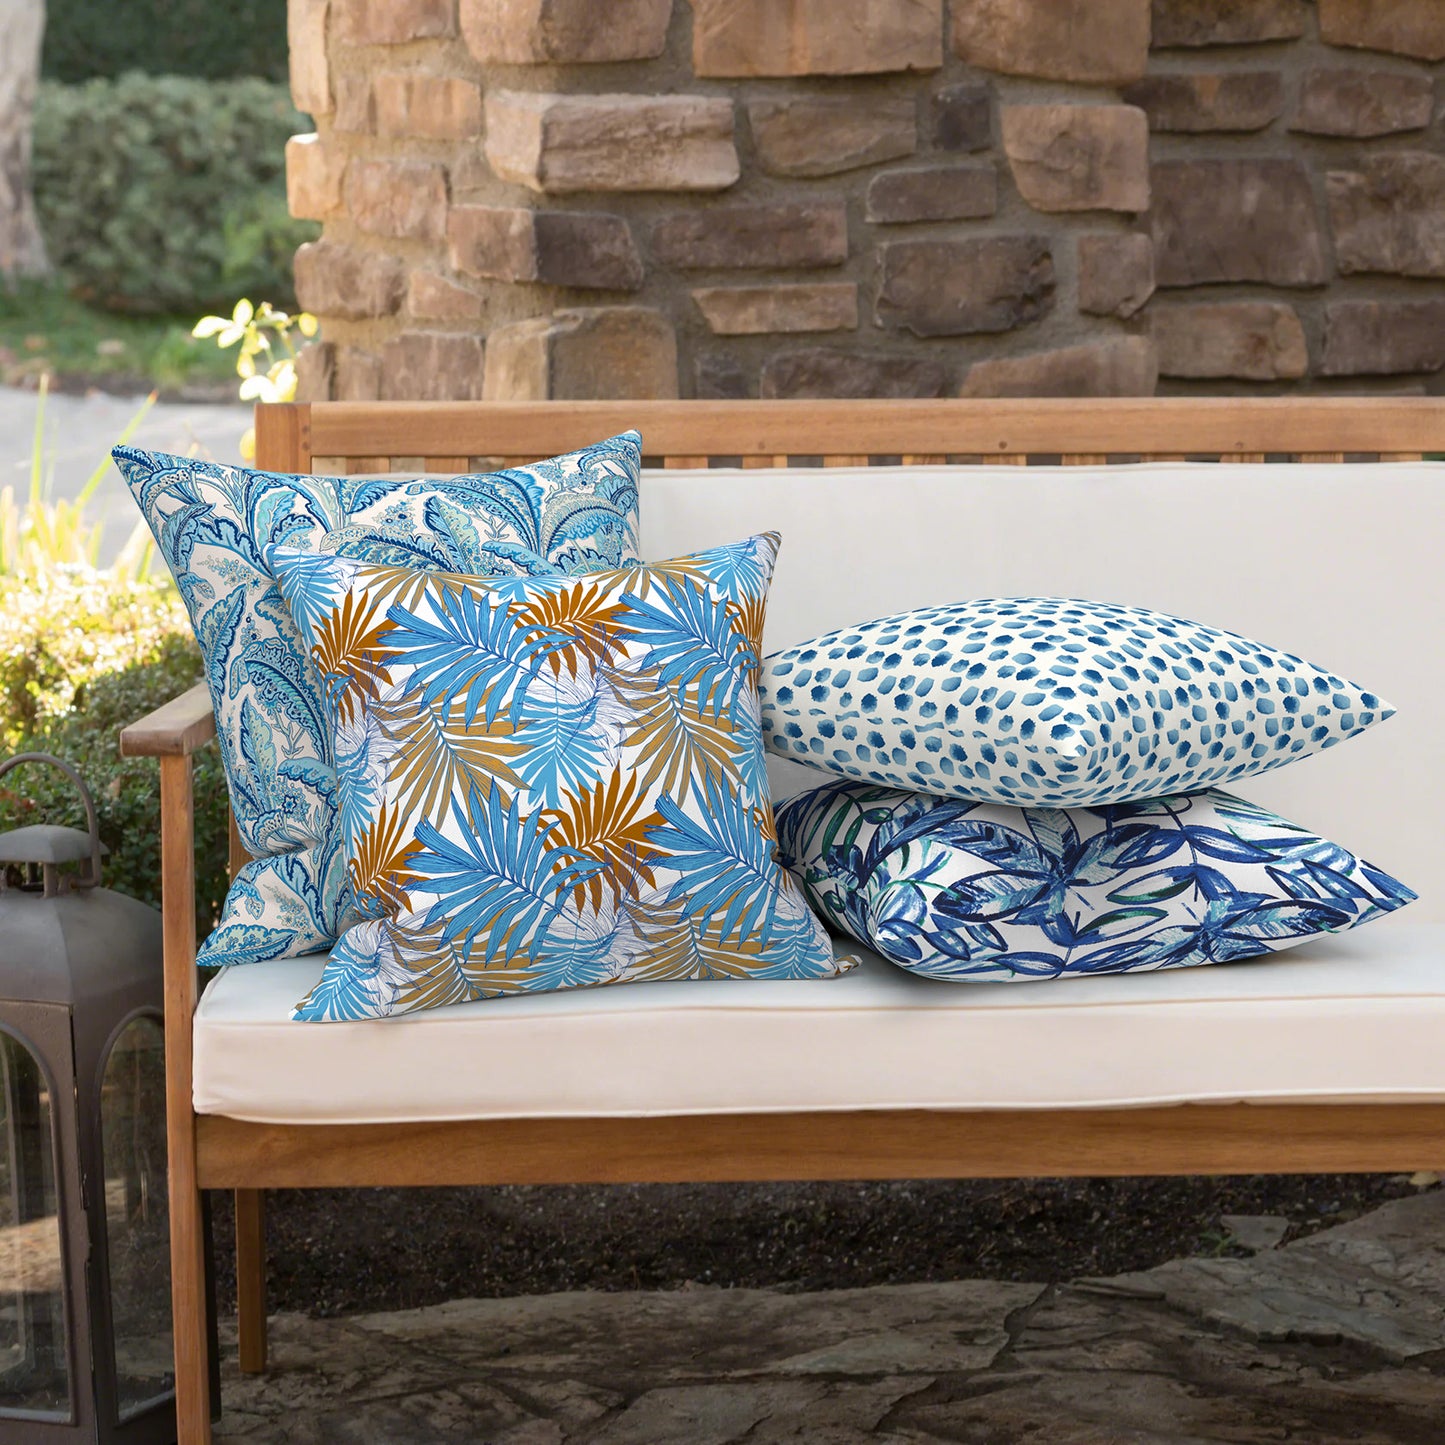 Melody Elephant Outdoor Throw Pillows 16x16 Inch, water Repellent patio pillows with Inners set of 2, outdoor pillows for patio furniture home garden, Brush Blue